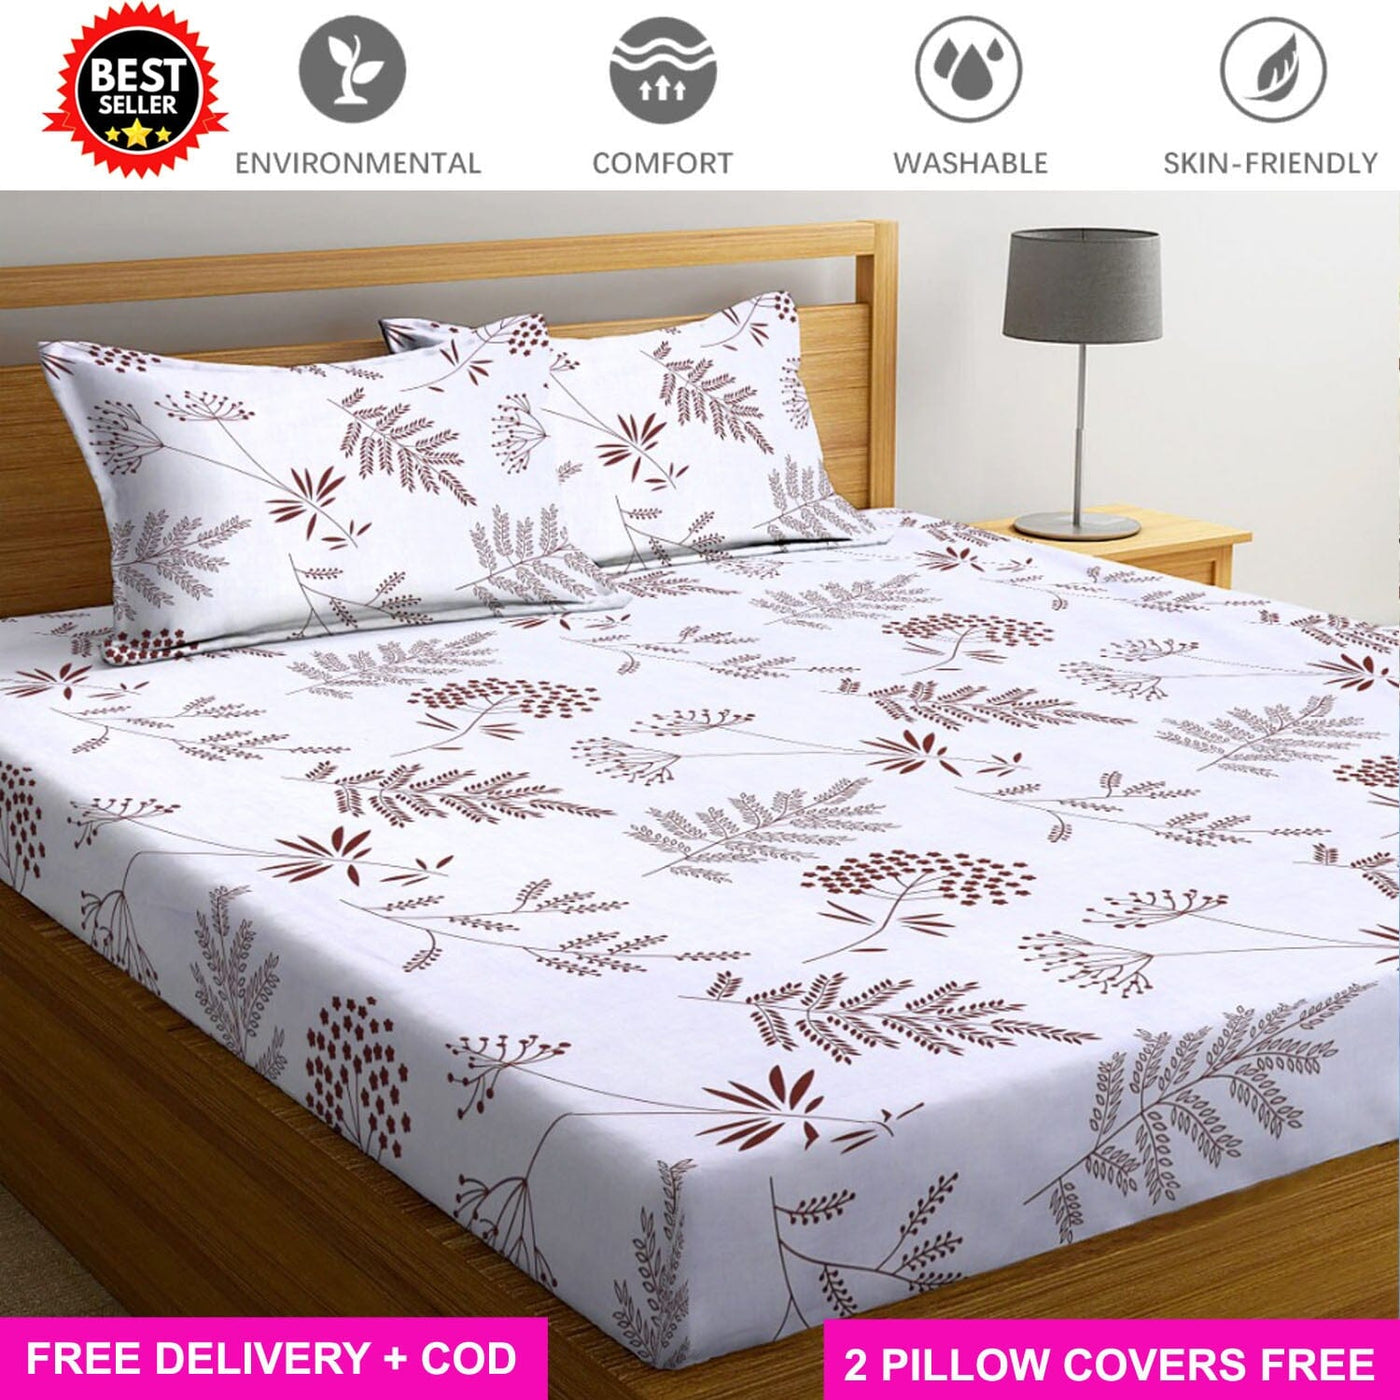 Cotton Elastic Fitted Bedsheet with 2 Pillow Covers - Fits with any Beds & Mattresses Great Happy IN Cream Grain KING SIZE 